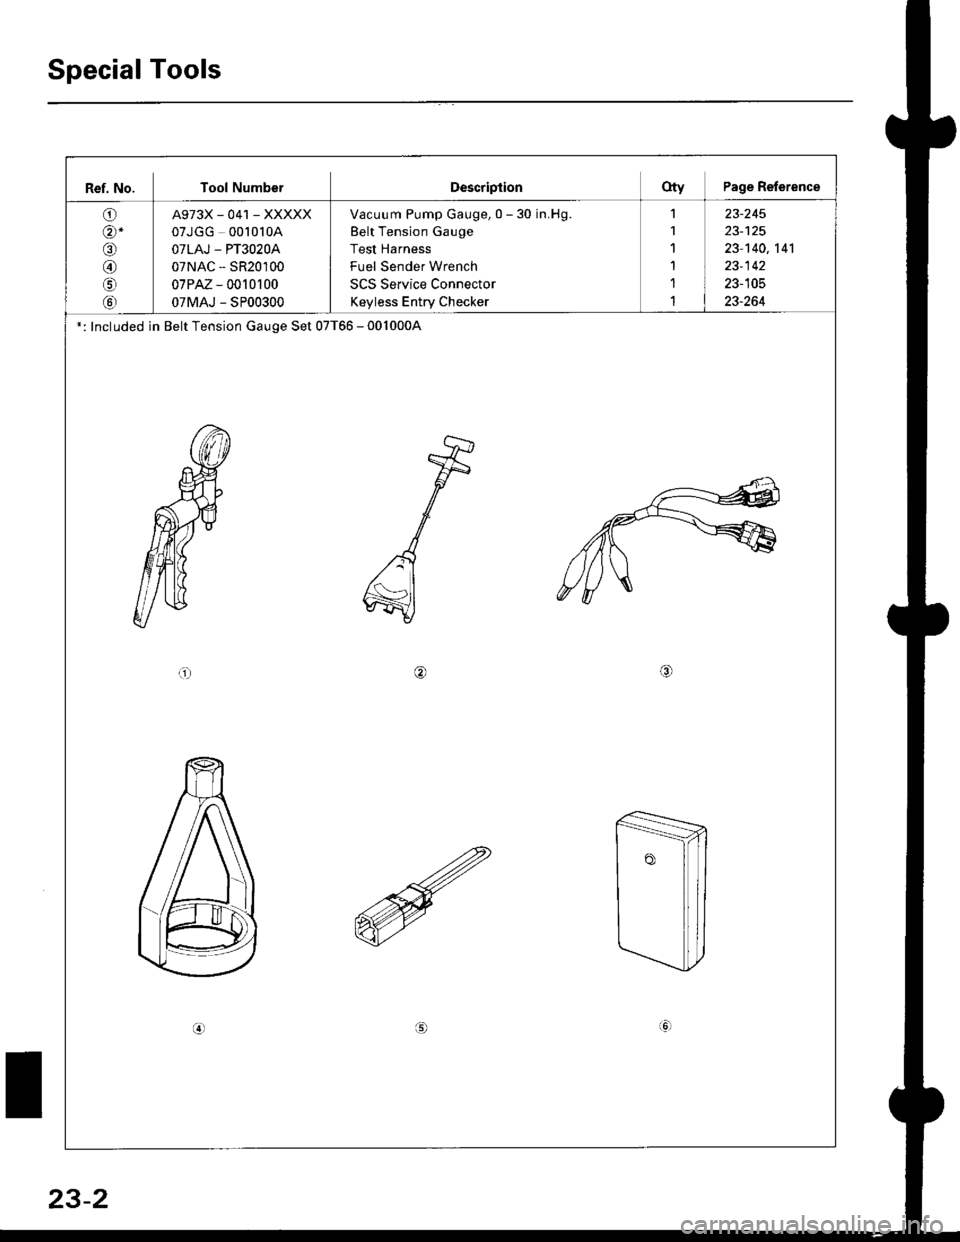 HONDA CIVIC 1996 6.G Service Manual Special Tools
Ref. No. Tool NumberDescriptionOty Page Reference
O)
@-
o
@
o
tol
A973X_041 _XXXXX
07JGG 00l0l0A
OTLAJ - PT3O2OA
07NAC - SR20100
07PM - 0010r 00
07MAJ - SP00300
Vacuum Pump Gauge, 0 - 30